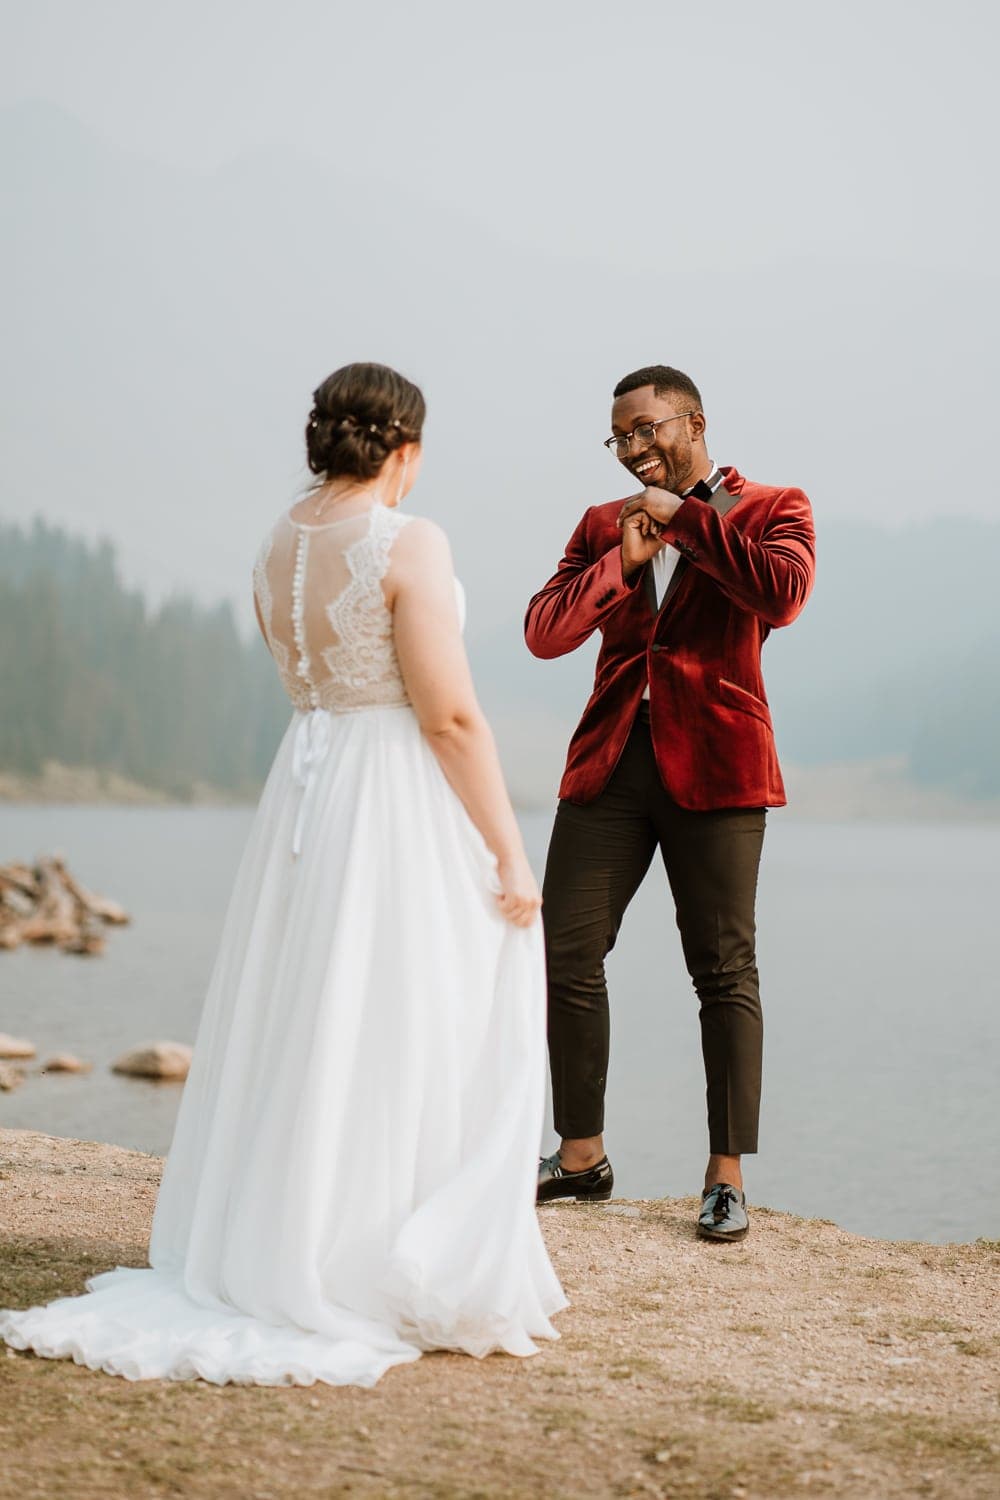 The Ultimate Step-by-Step Guide on How to Plan an Elopement